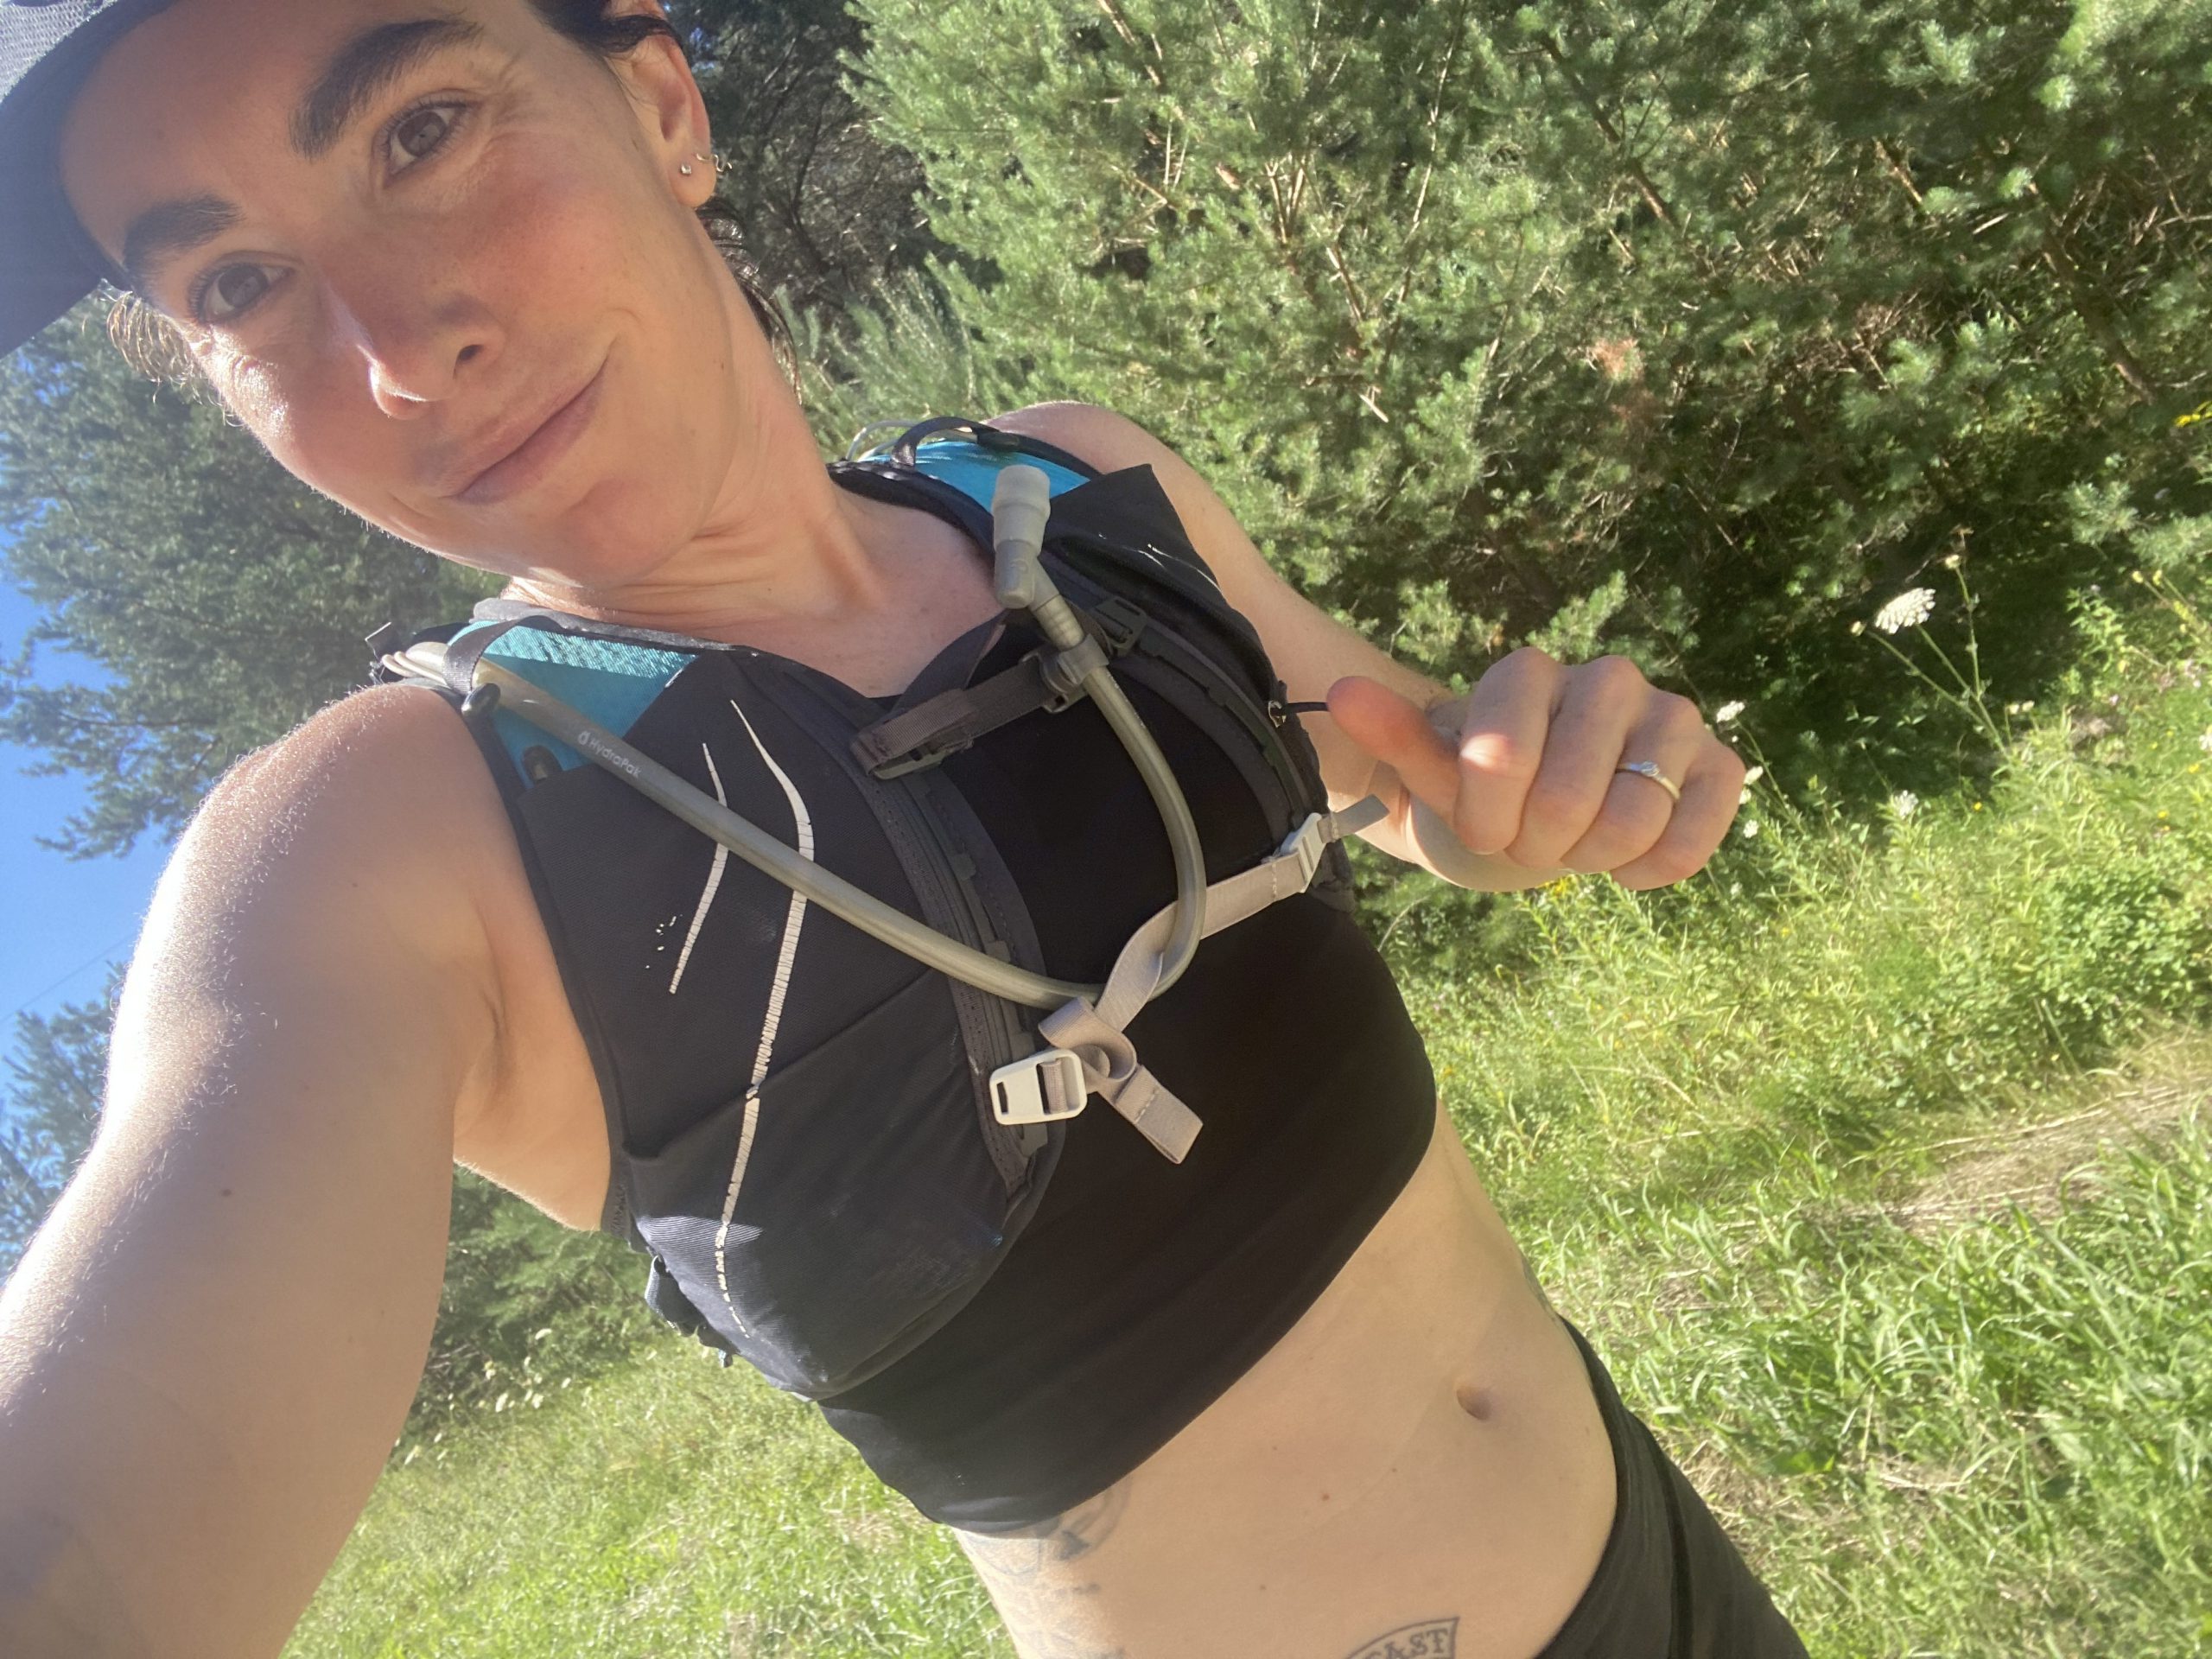 A person wearing a sleeveless sports top and hydration pack is outside in a grassy and forested area. They are taking a selfie, and the image is upside down. Sunlight is casting shadows, and the sky is clear and blue.